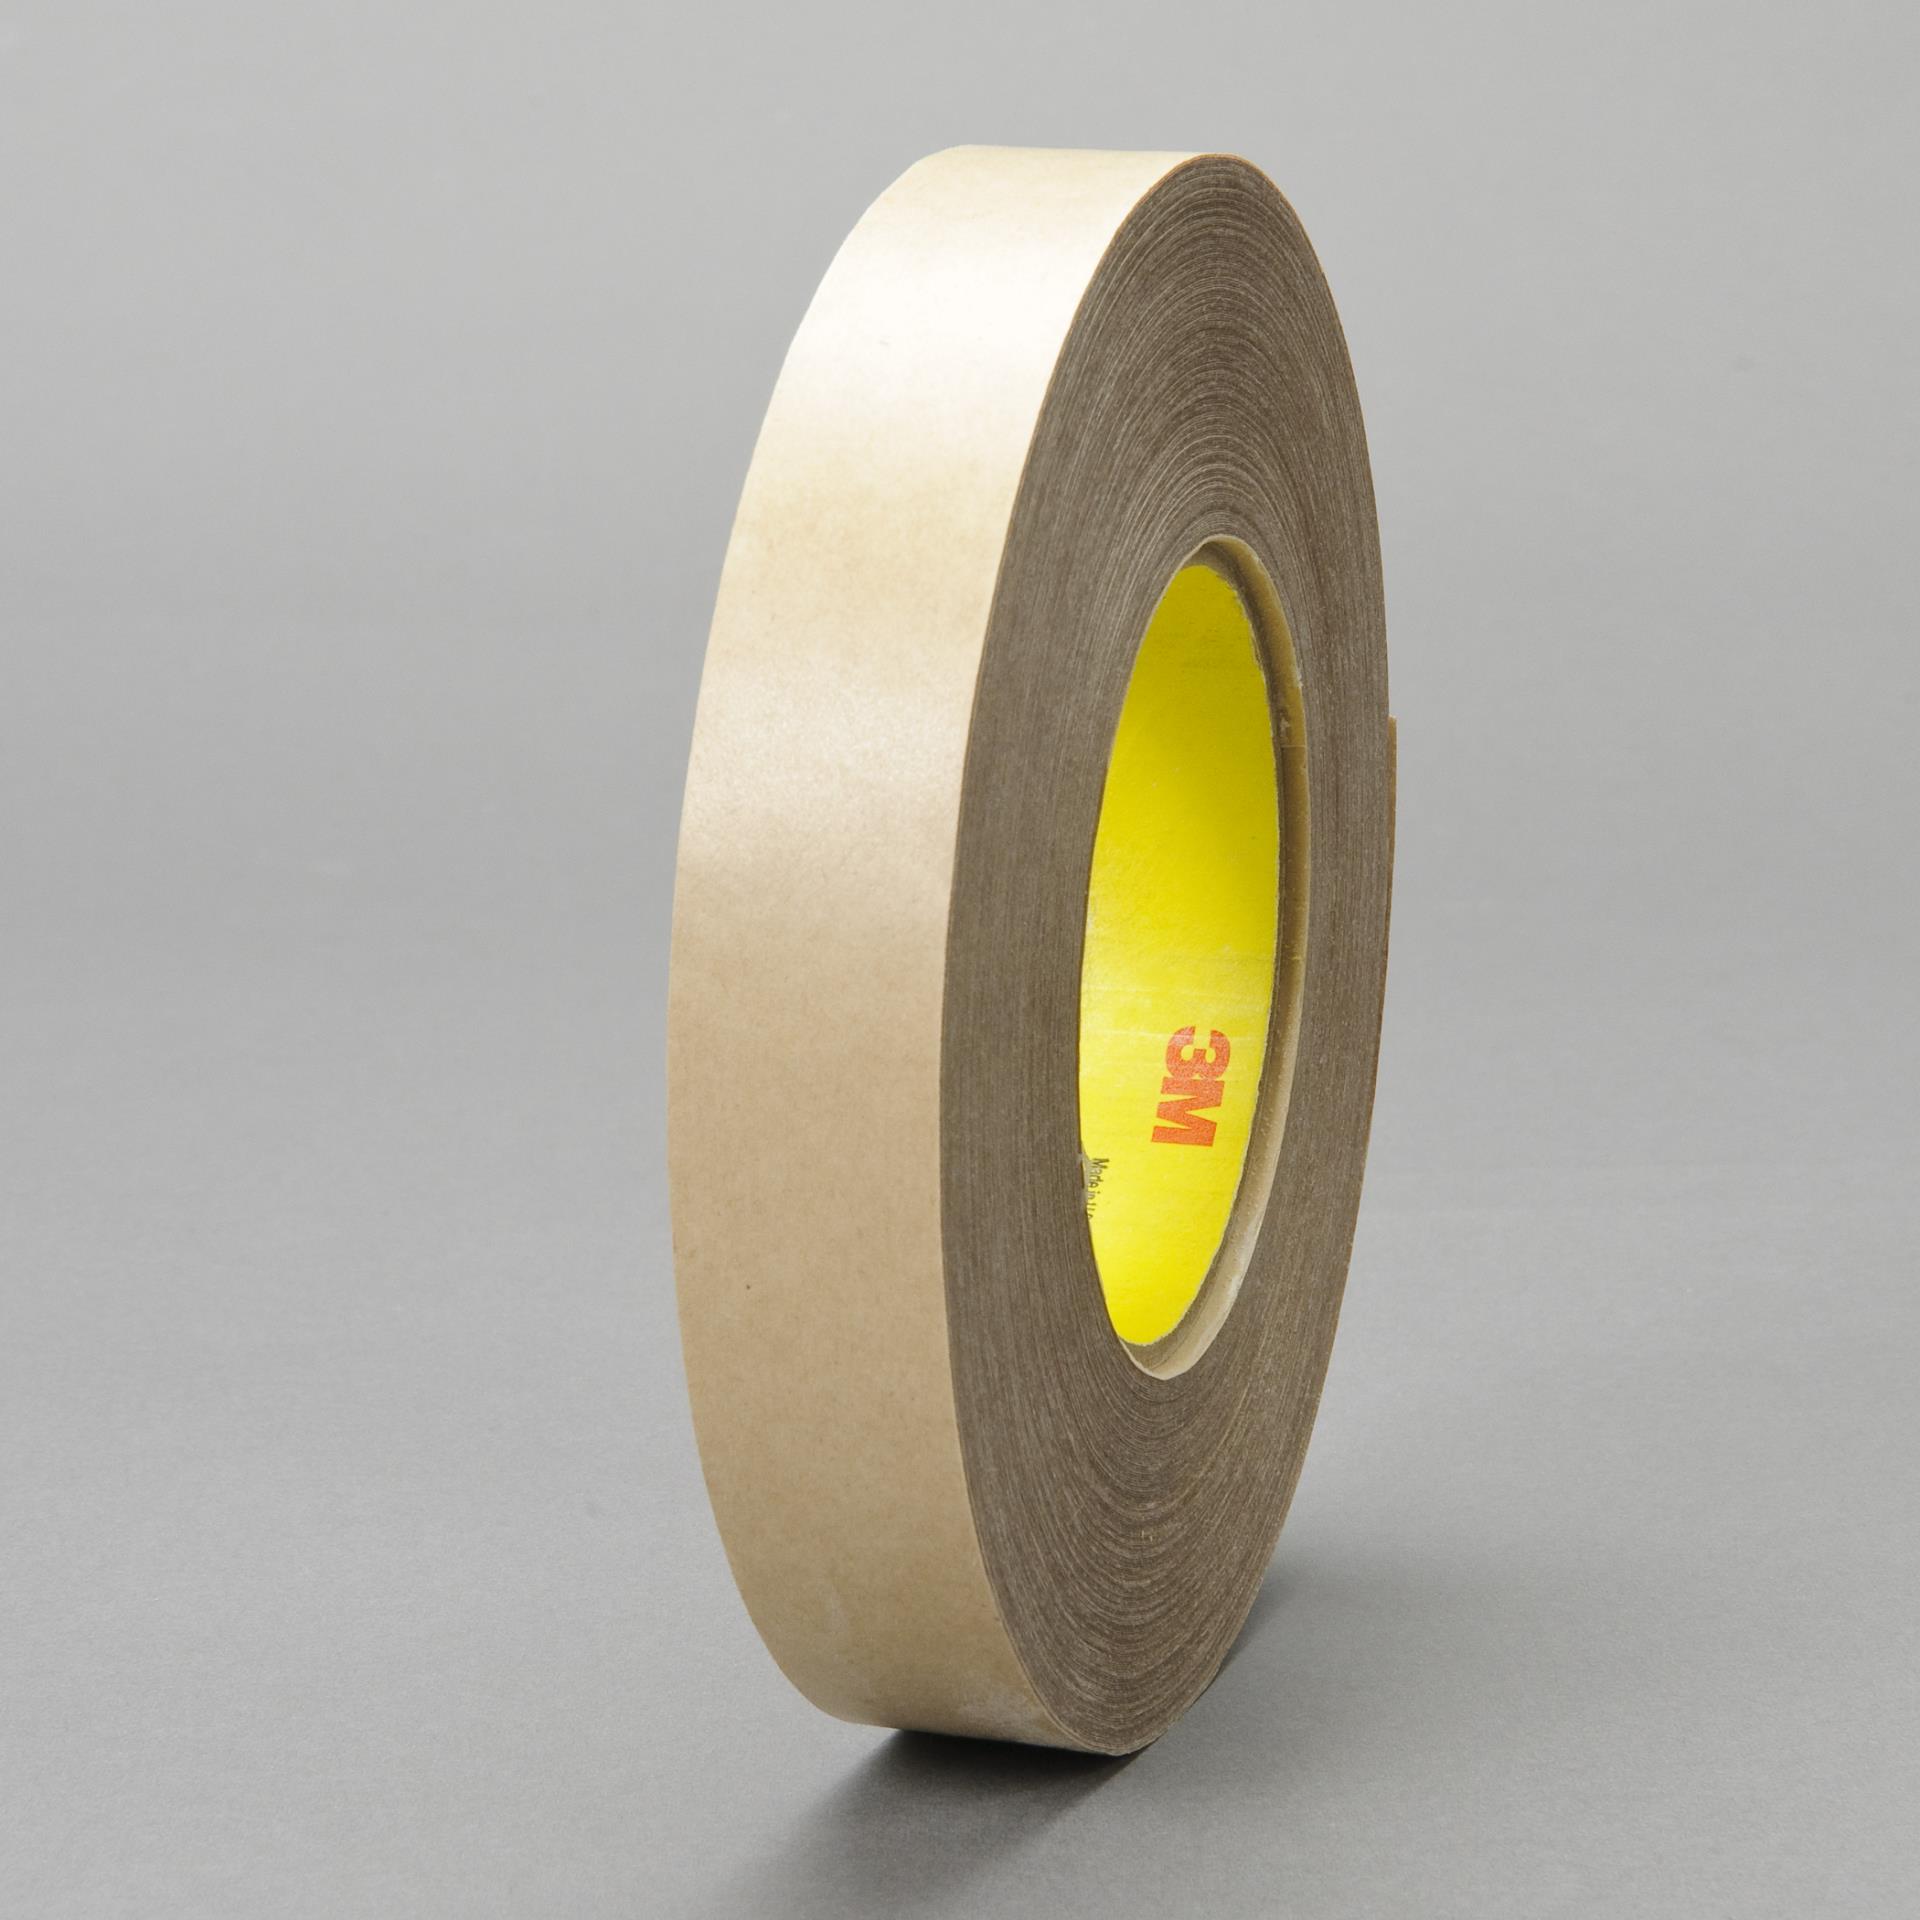 3M VHB F9473PC Adhesive Transfer Tape in x 180 ft. Transparent Tape Roll for Permanent Bonding. Adhesive Tapes - 3